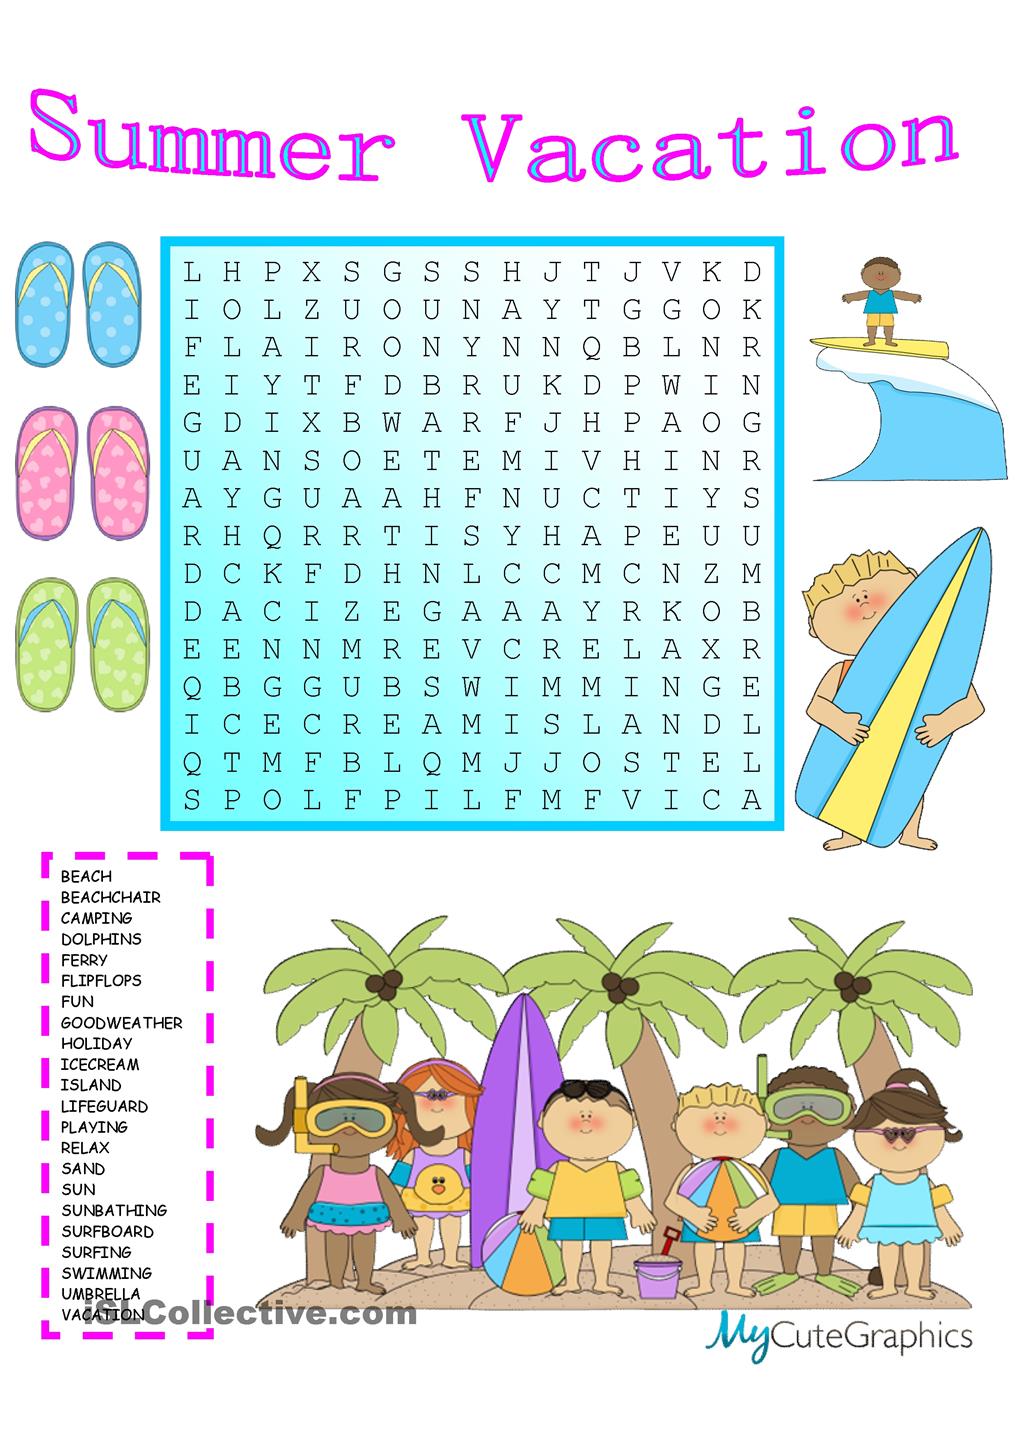 5-free-summer-activity-printable-worksheets-more-than-a-30-frugal-summer-activities-a-free